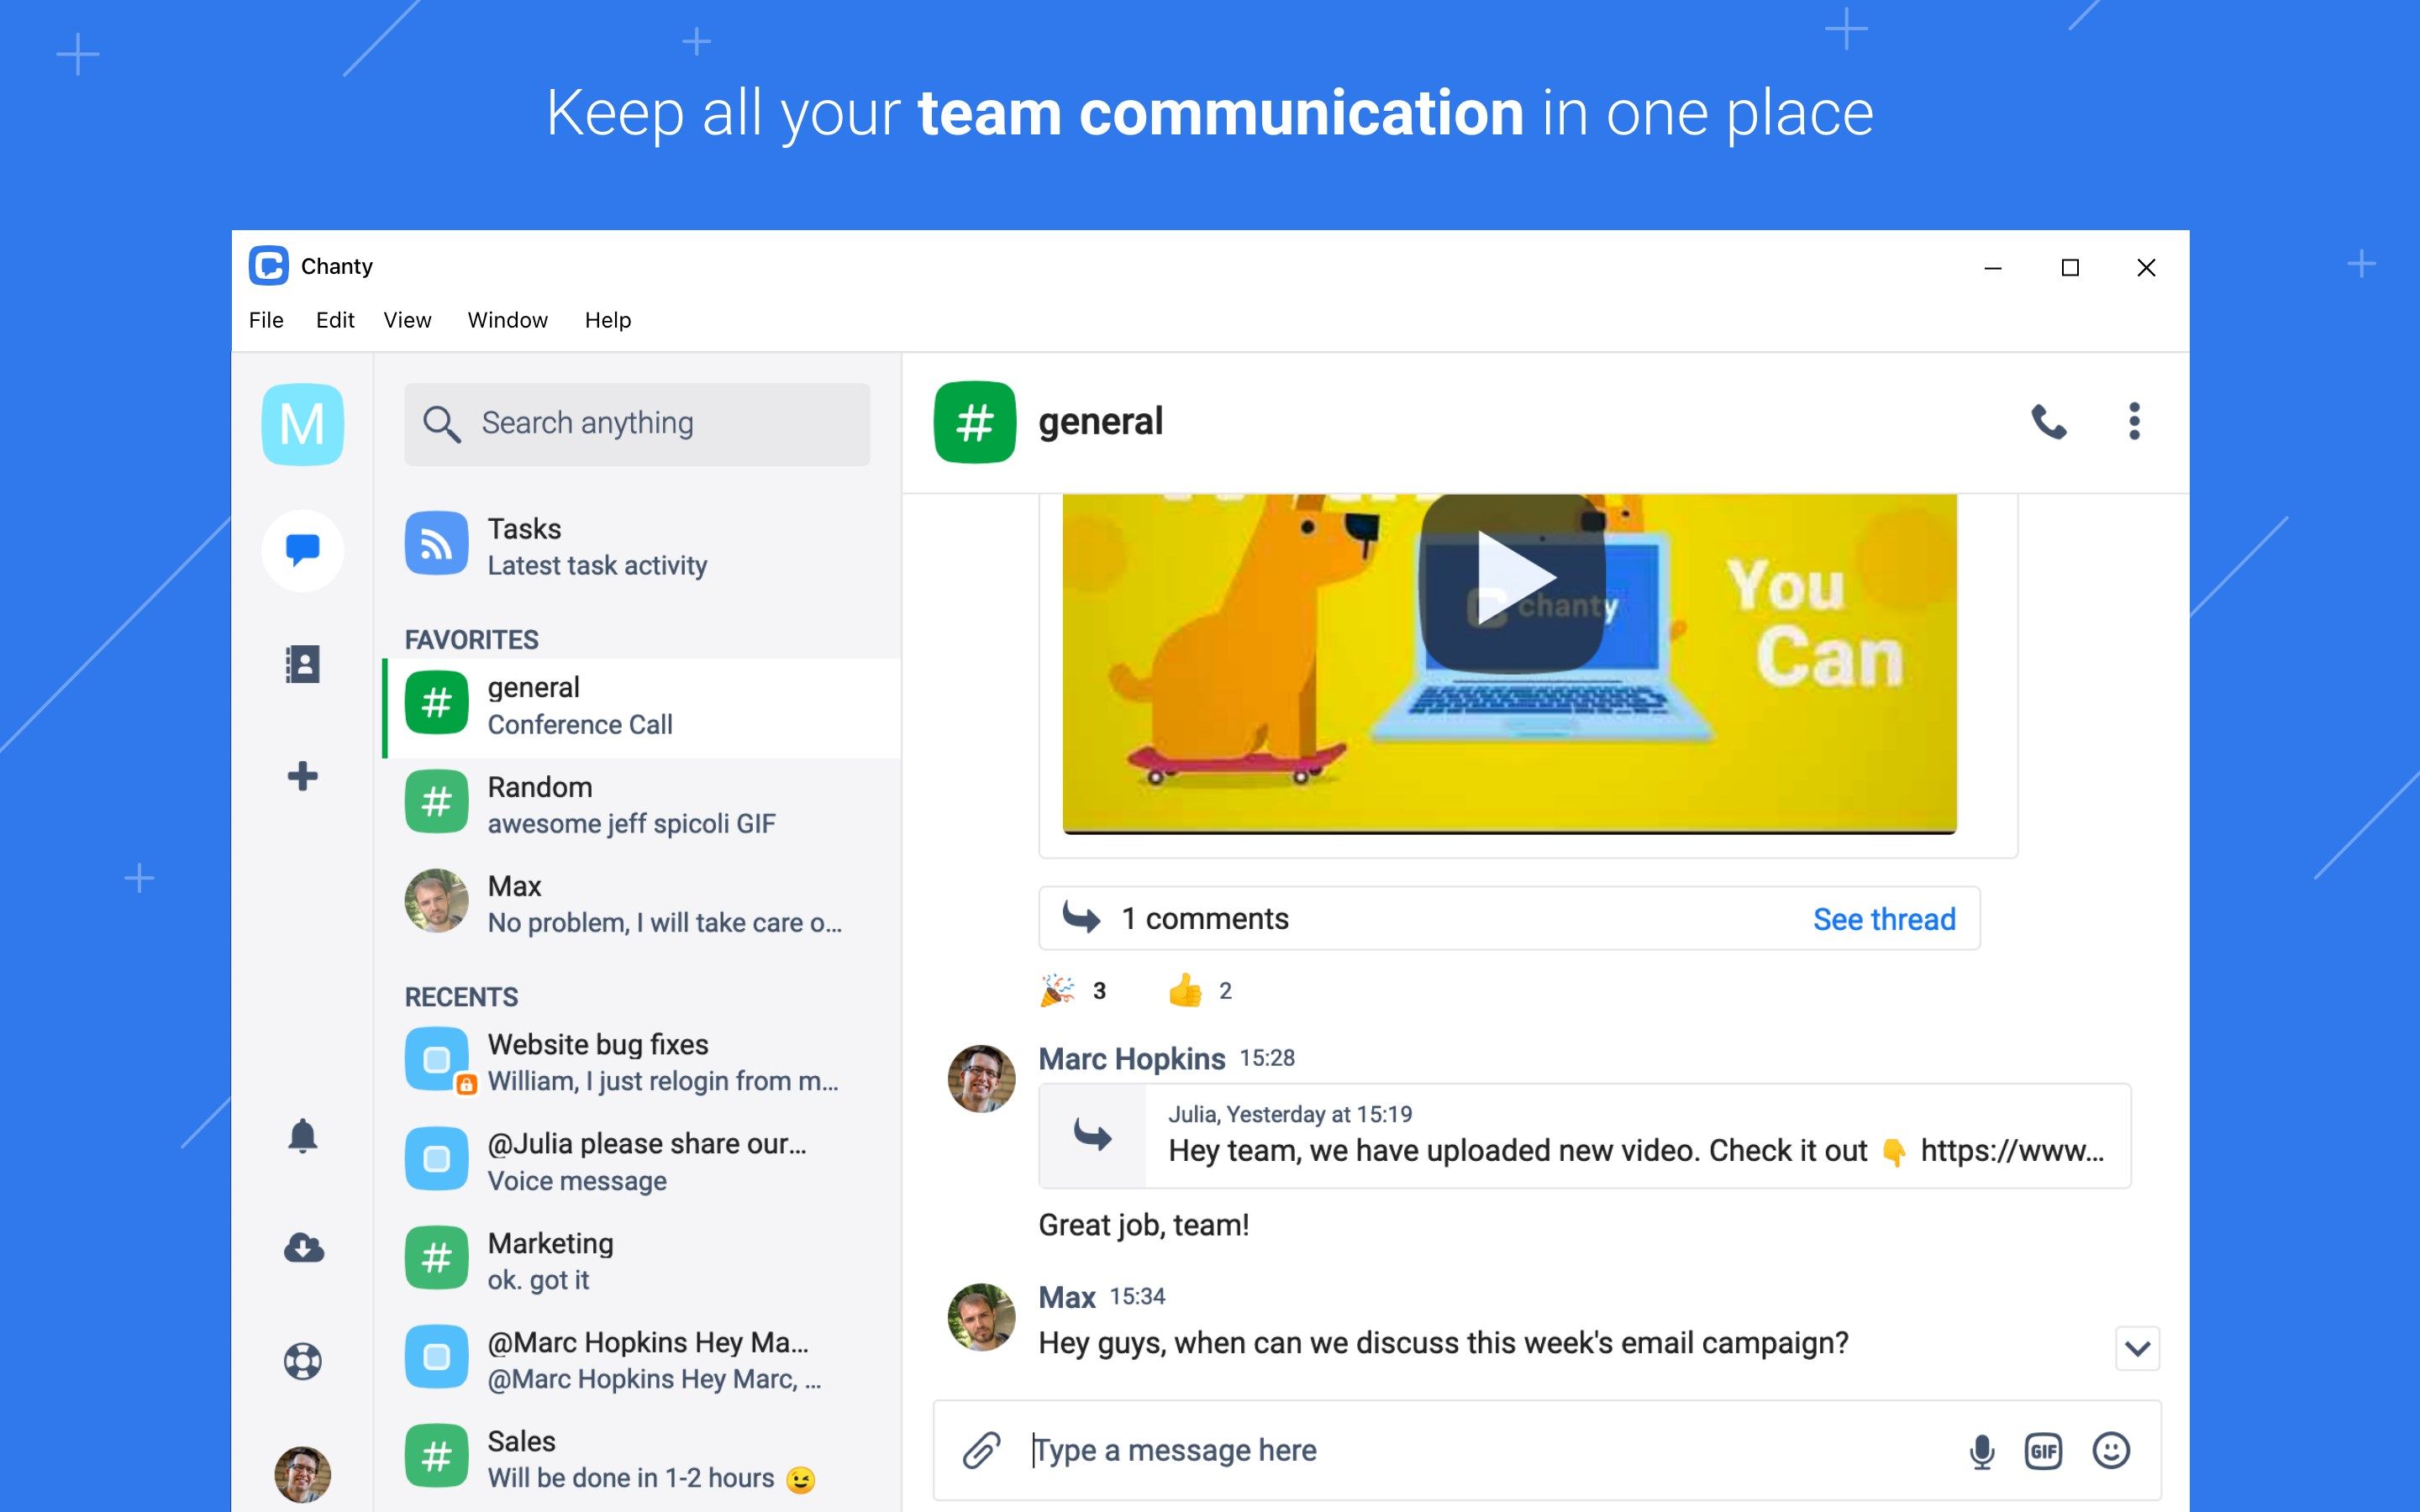 Keep all your team communication in one place